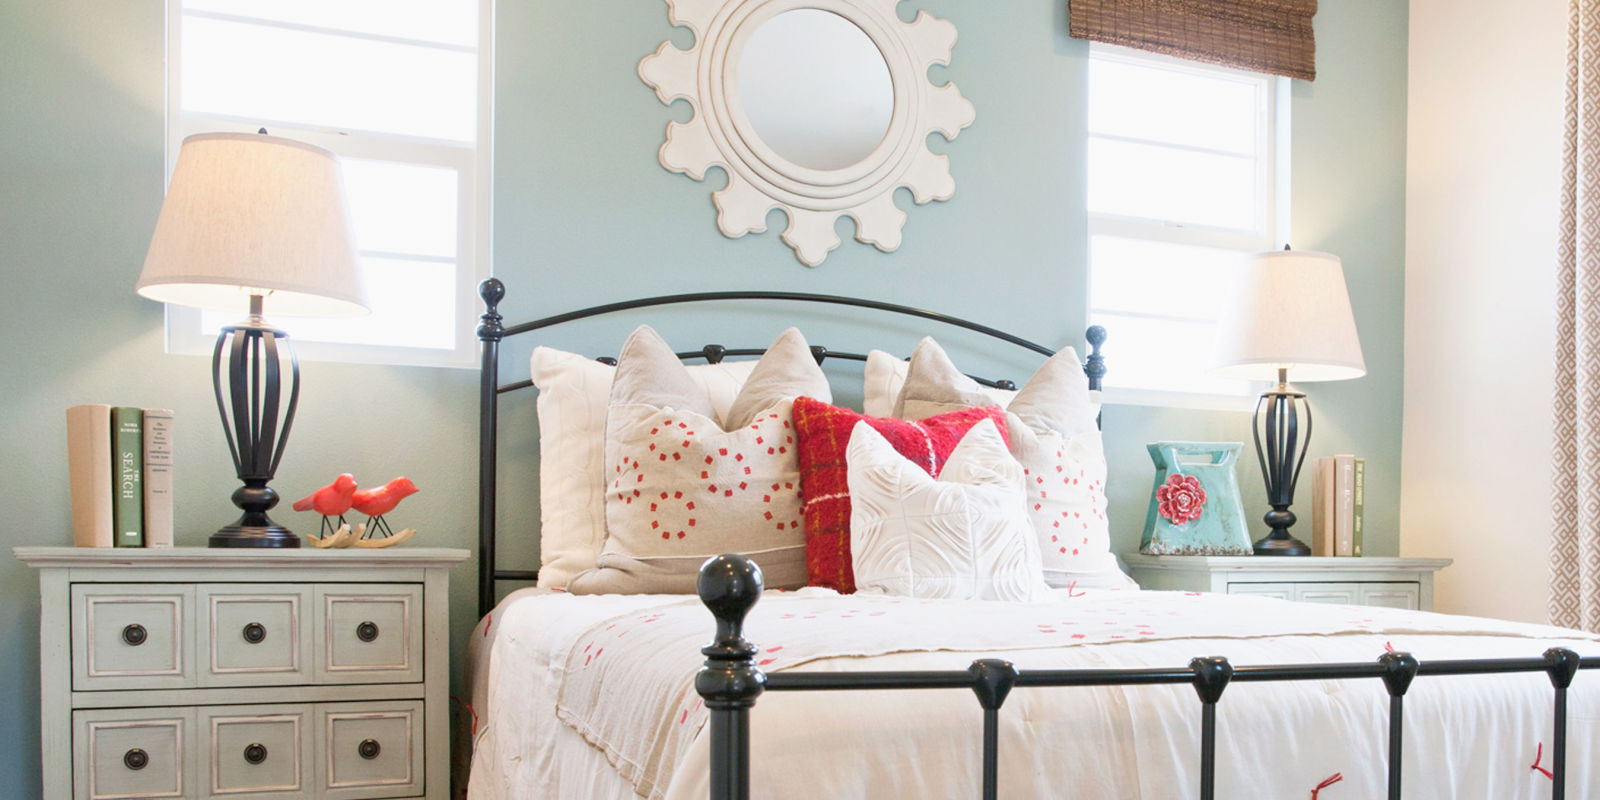 Kids Guest Room Ideas
 Guest Room Ideas What to Put in a Guest Room